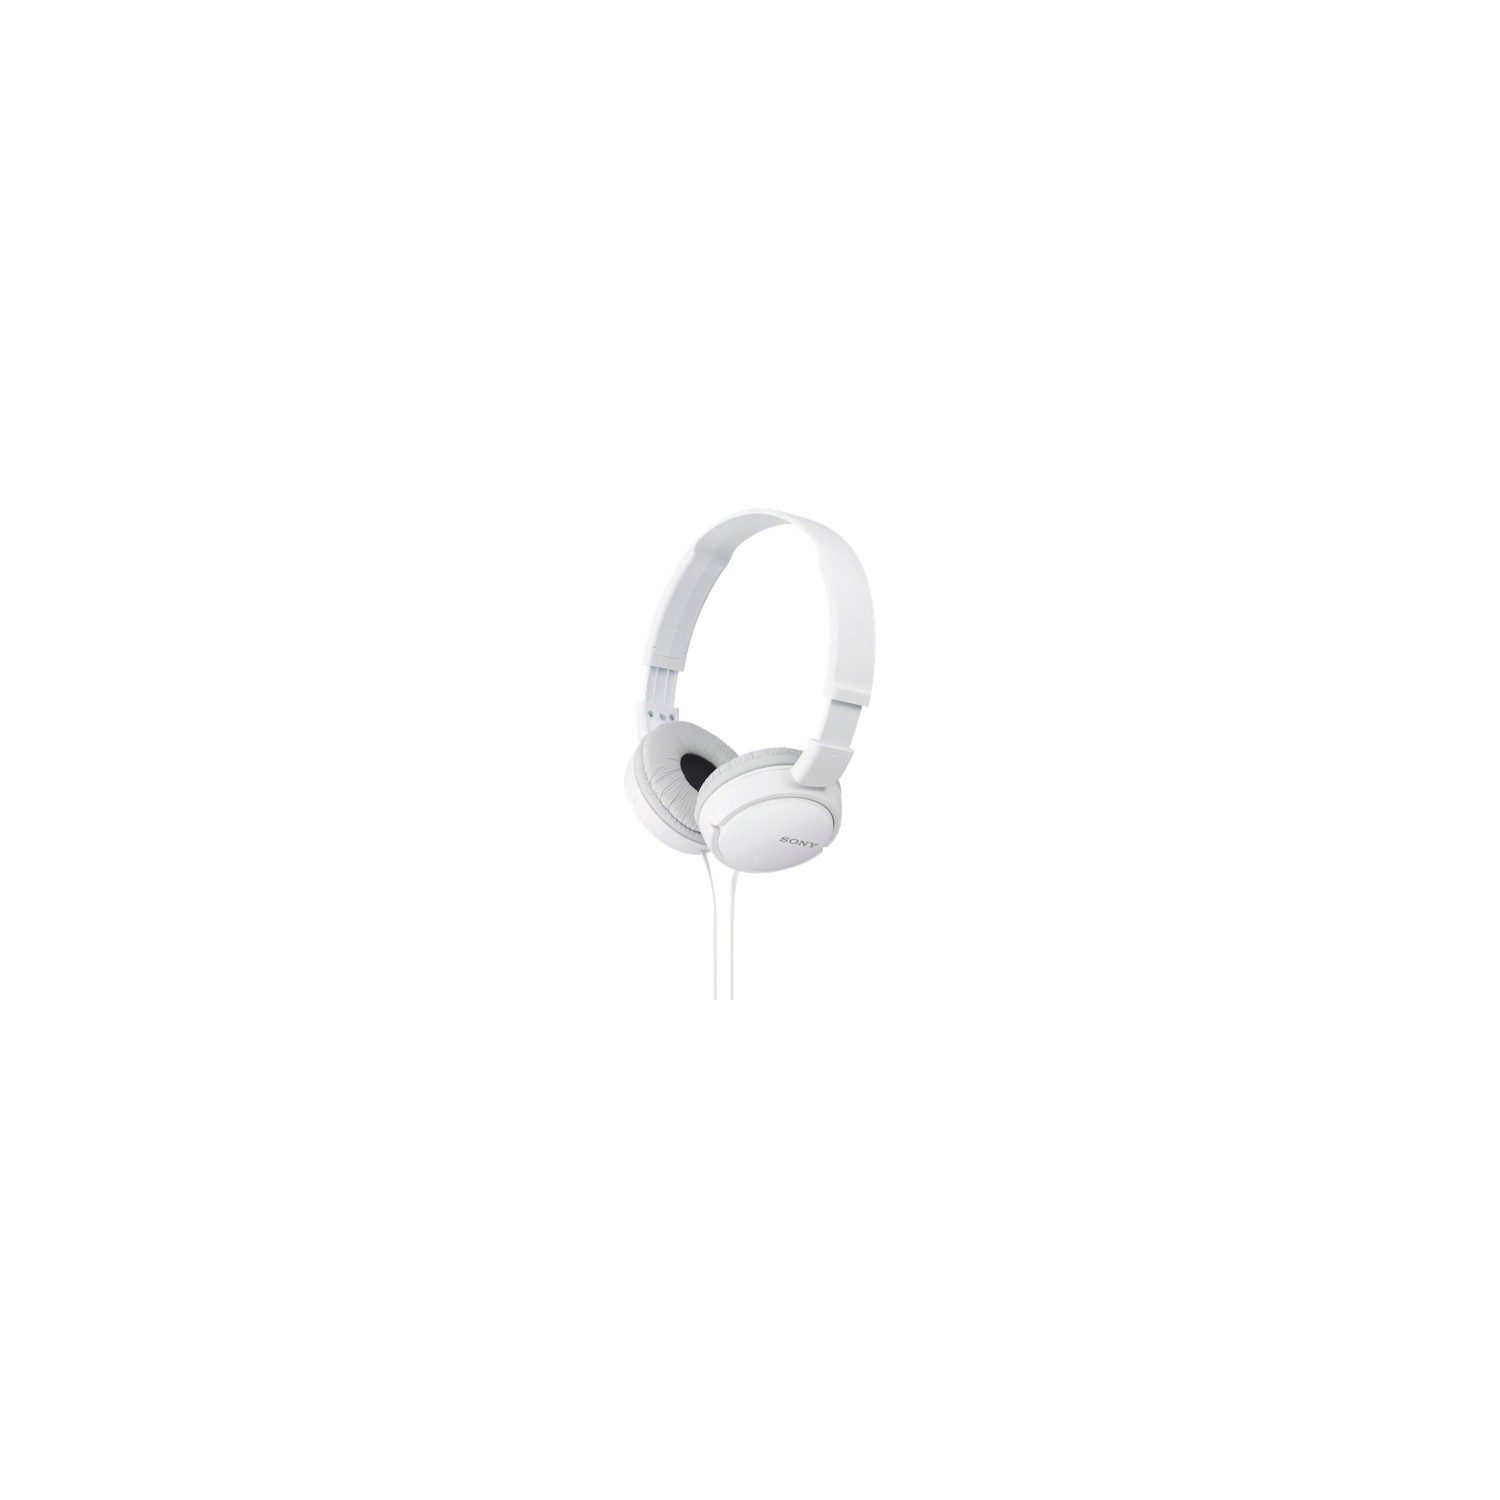 Open Box - Sony MDR-ZX110 Over-Ear Headphones - White